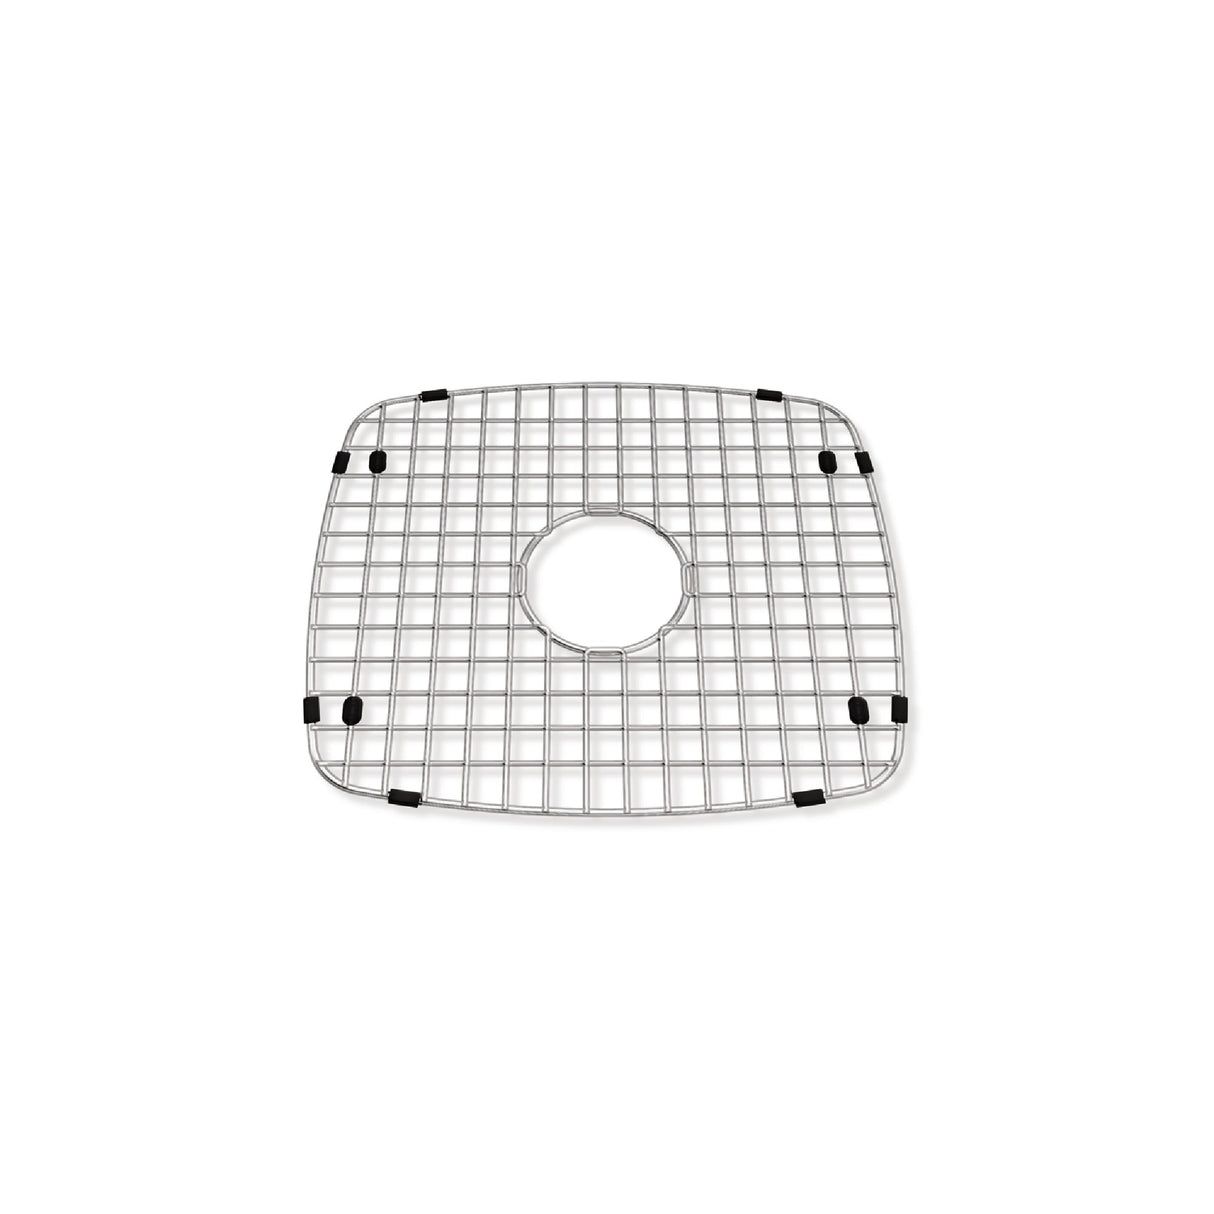 KINDRED BG110S Stainless Steel Bottom Grid for Sink 13.88-in x 15.88-in In Stainless Steel